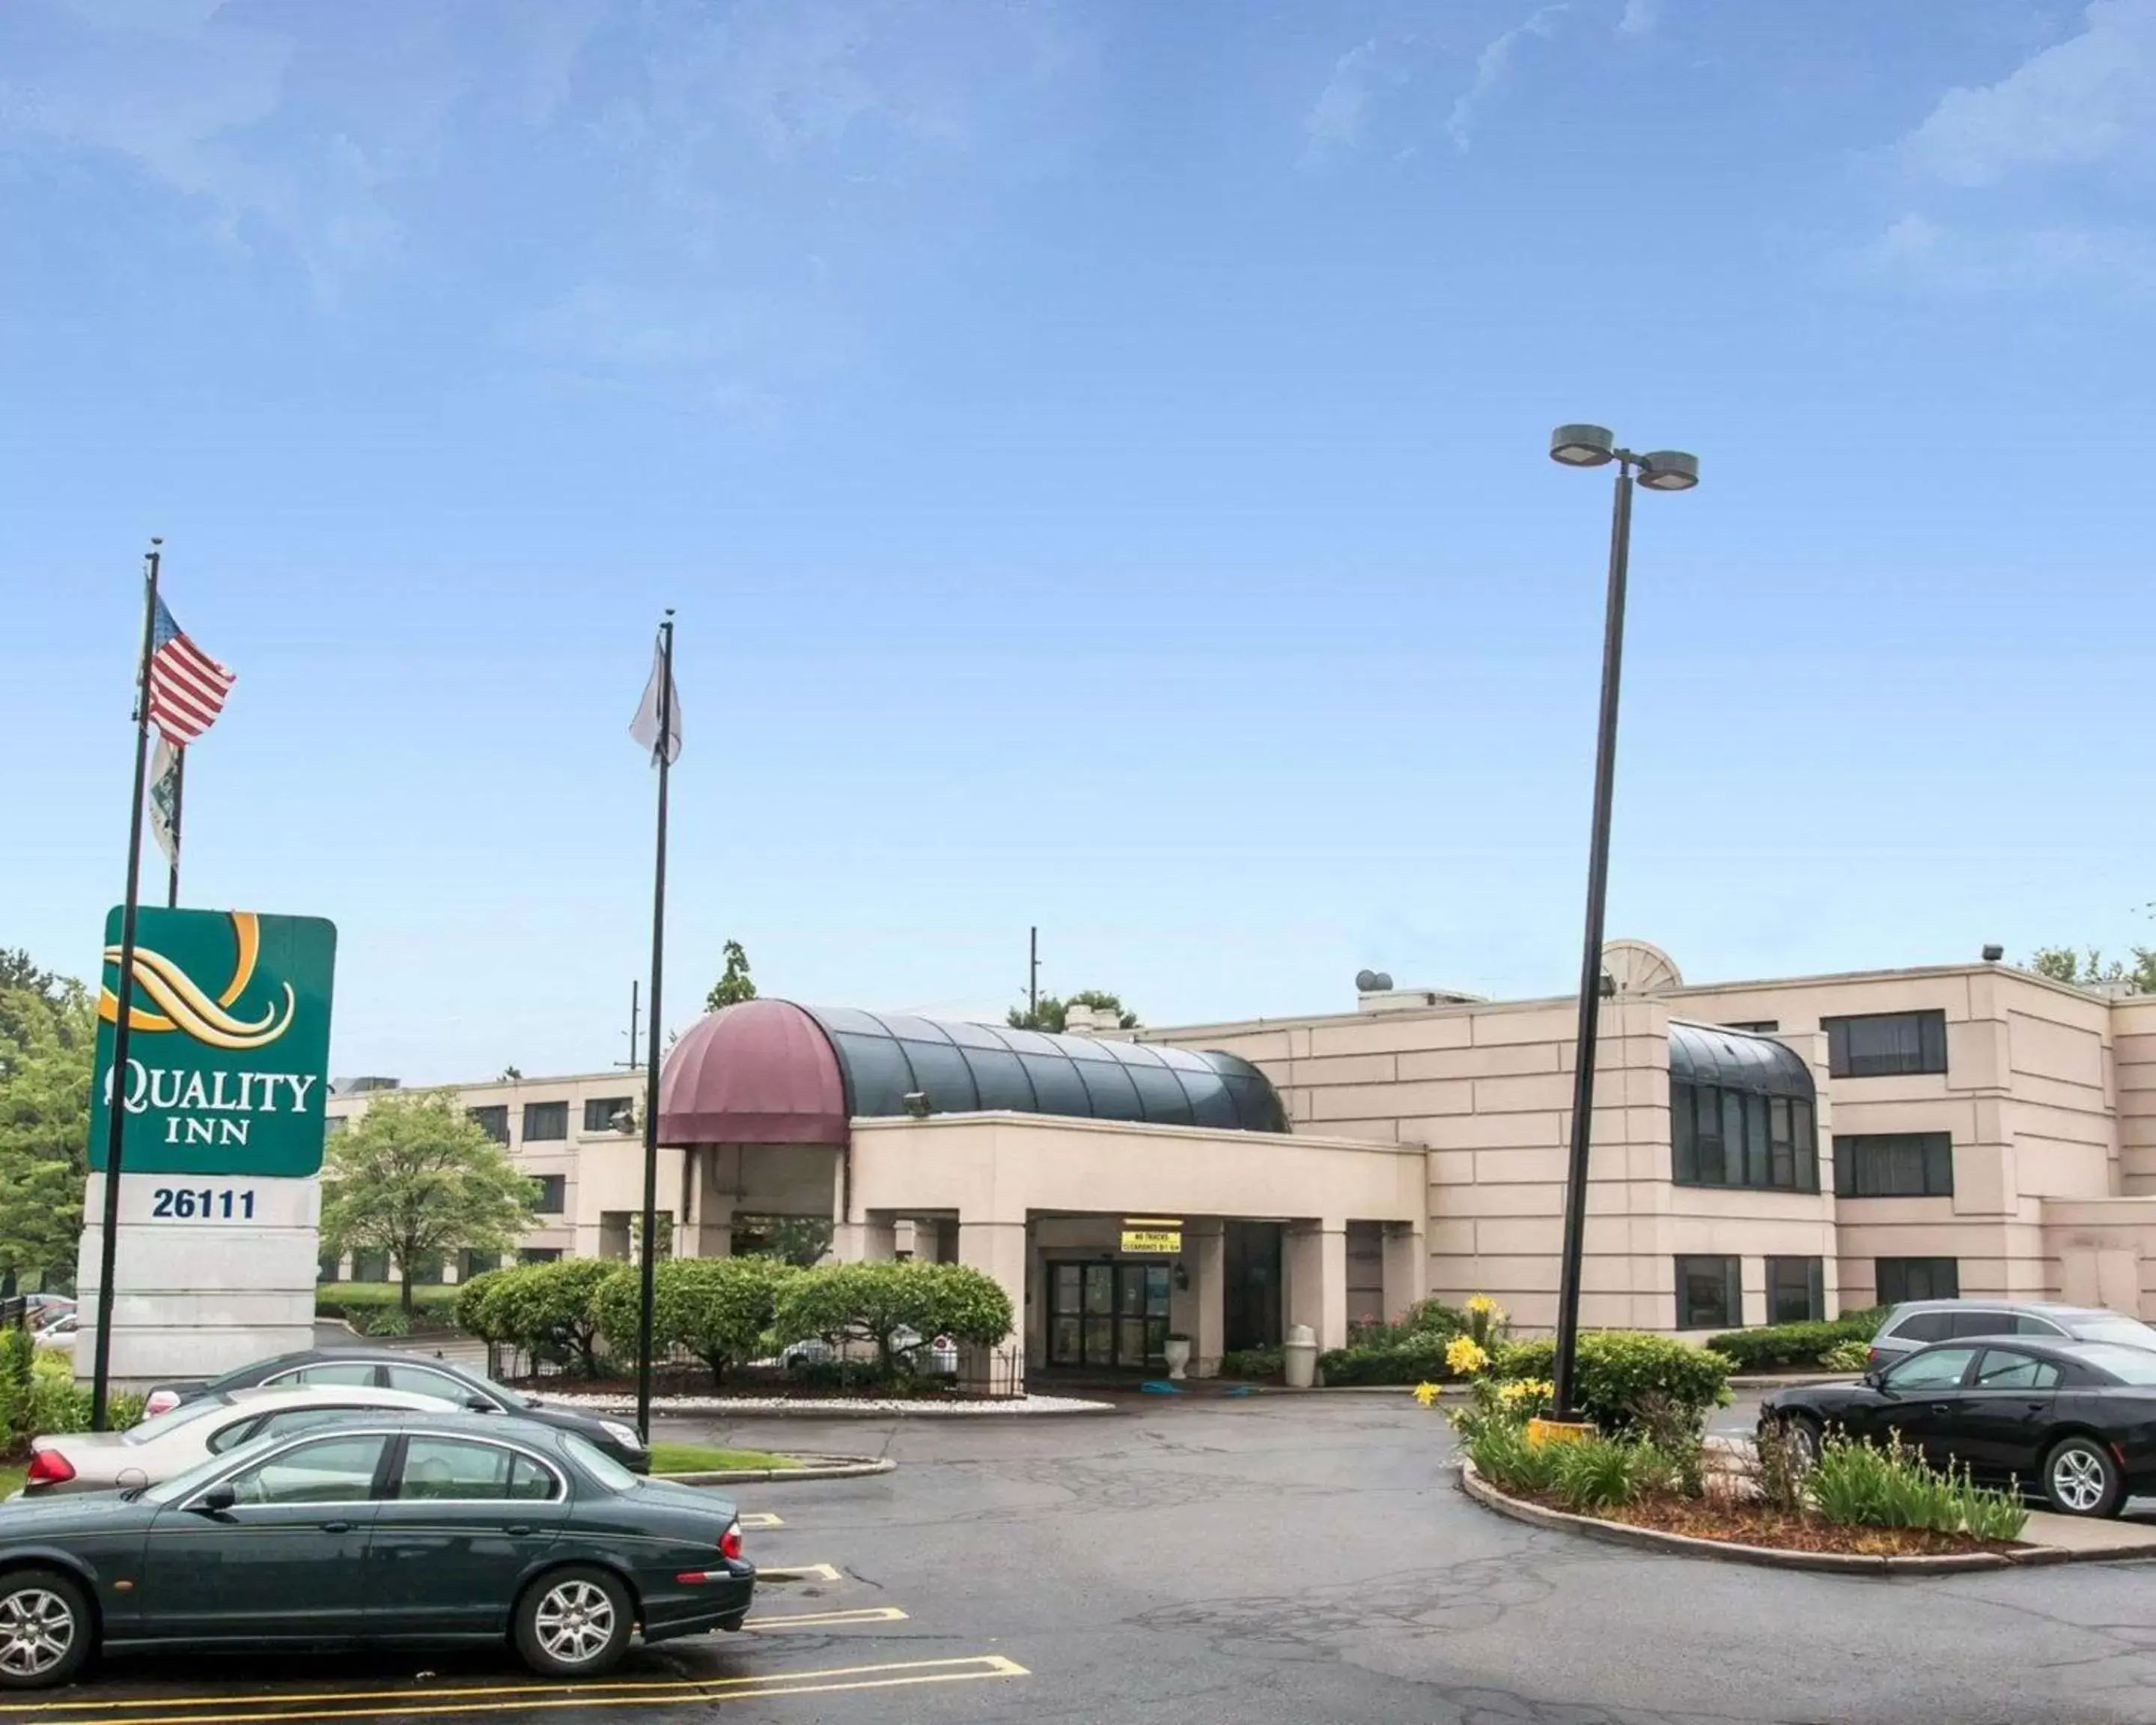 Property building in Quality Inn Southfield